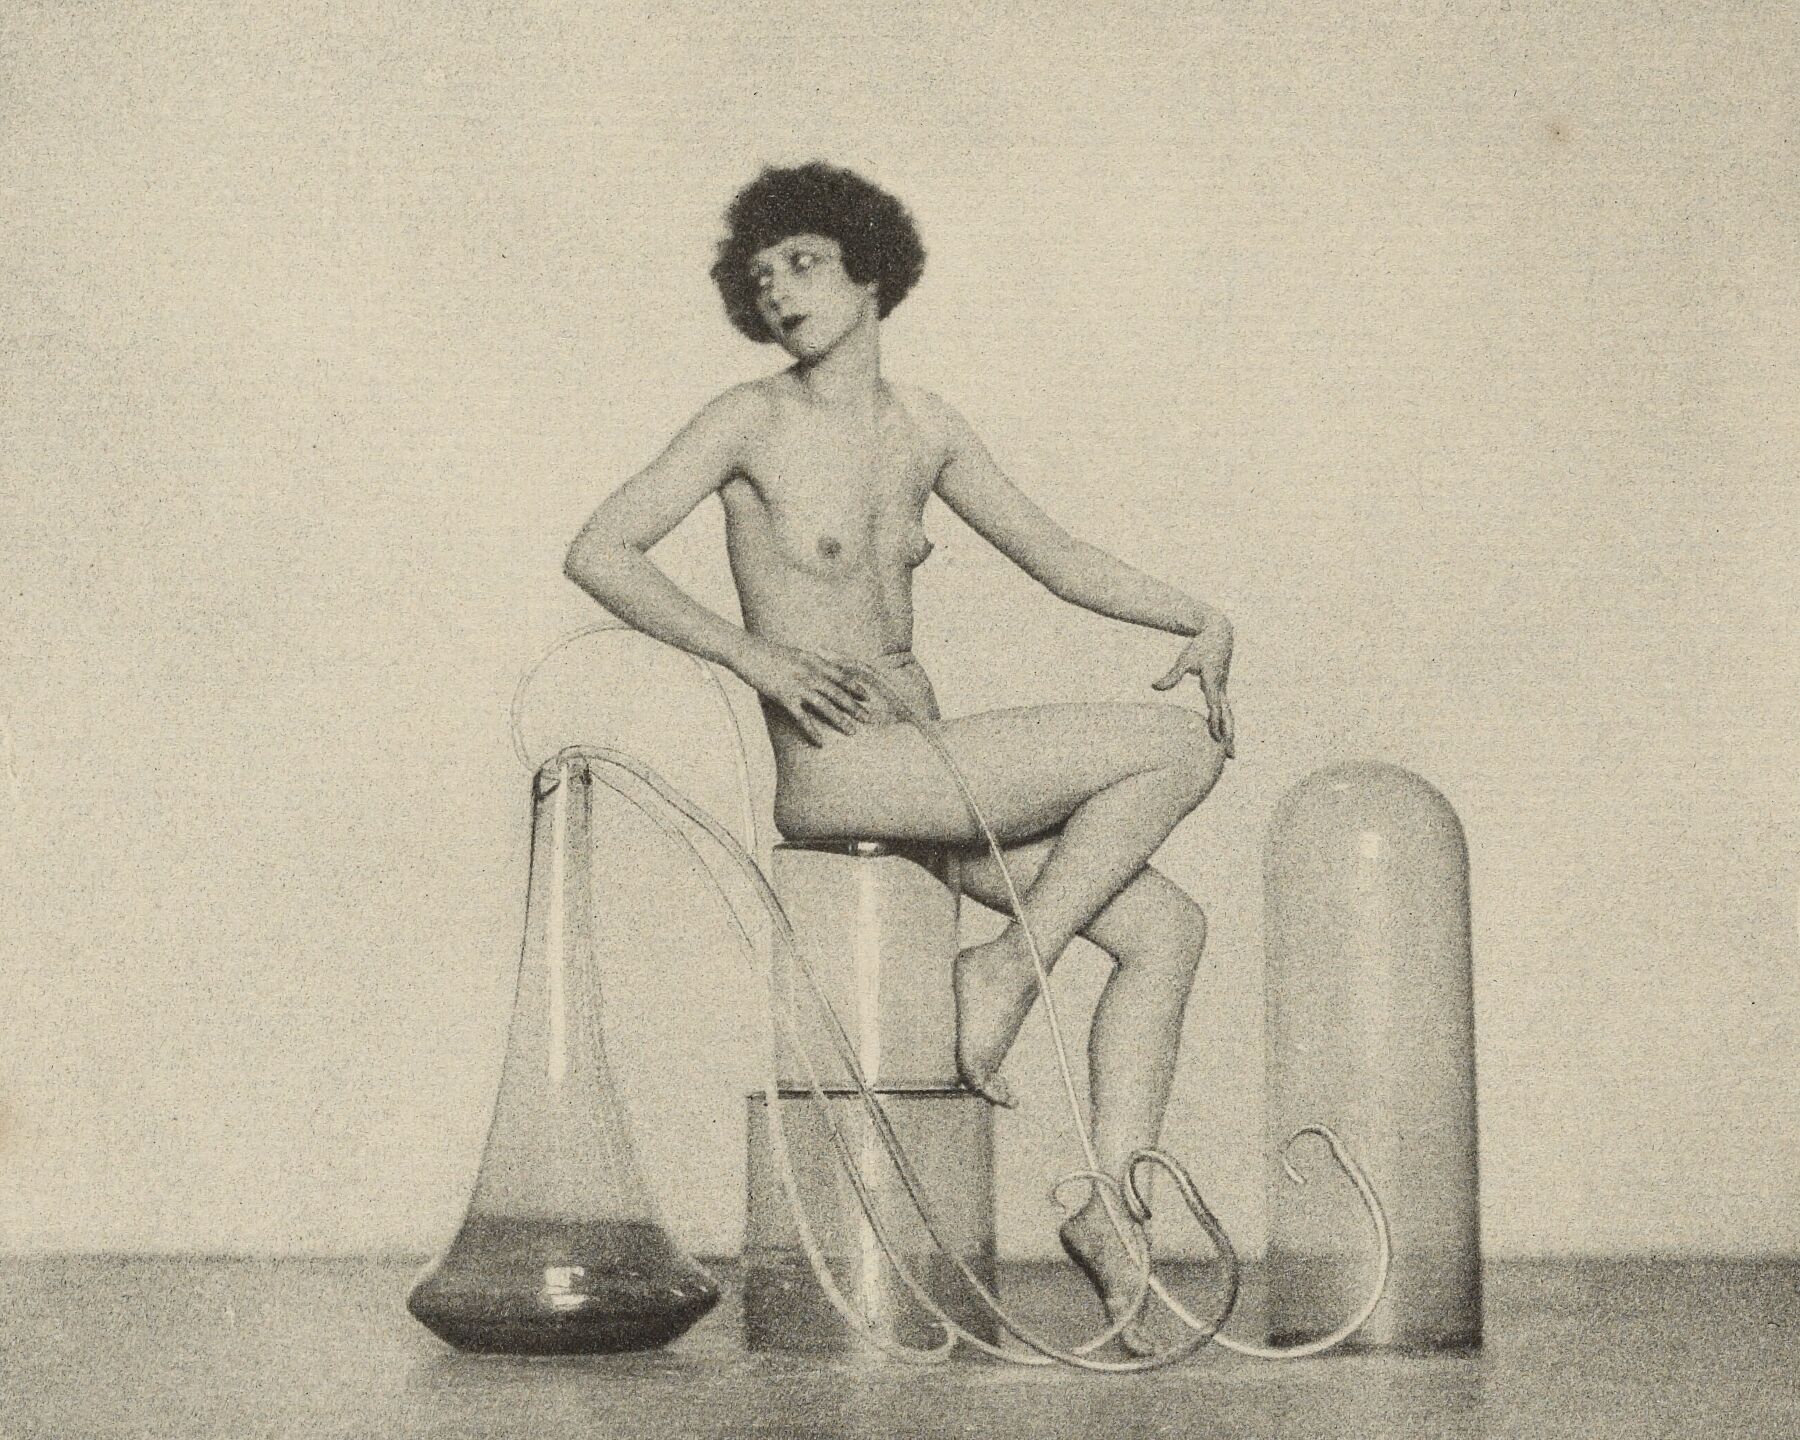 Female Nude Posed With Glass Jars by Arthur F. Kales - c.1920